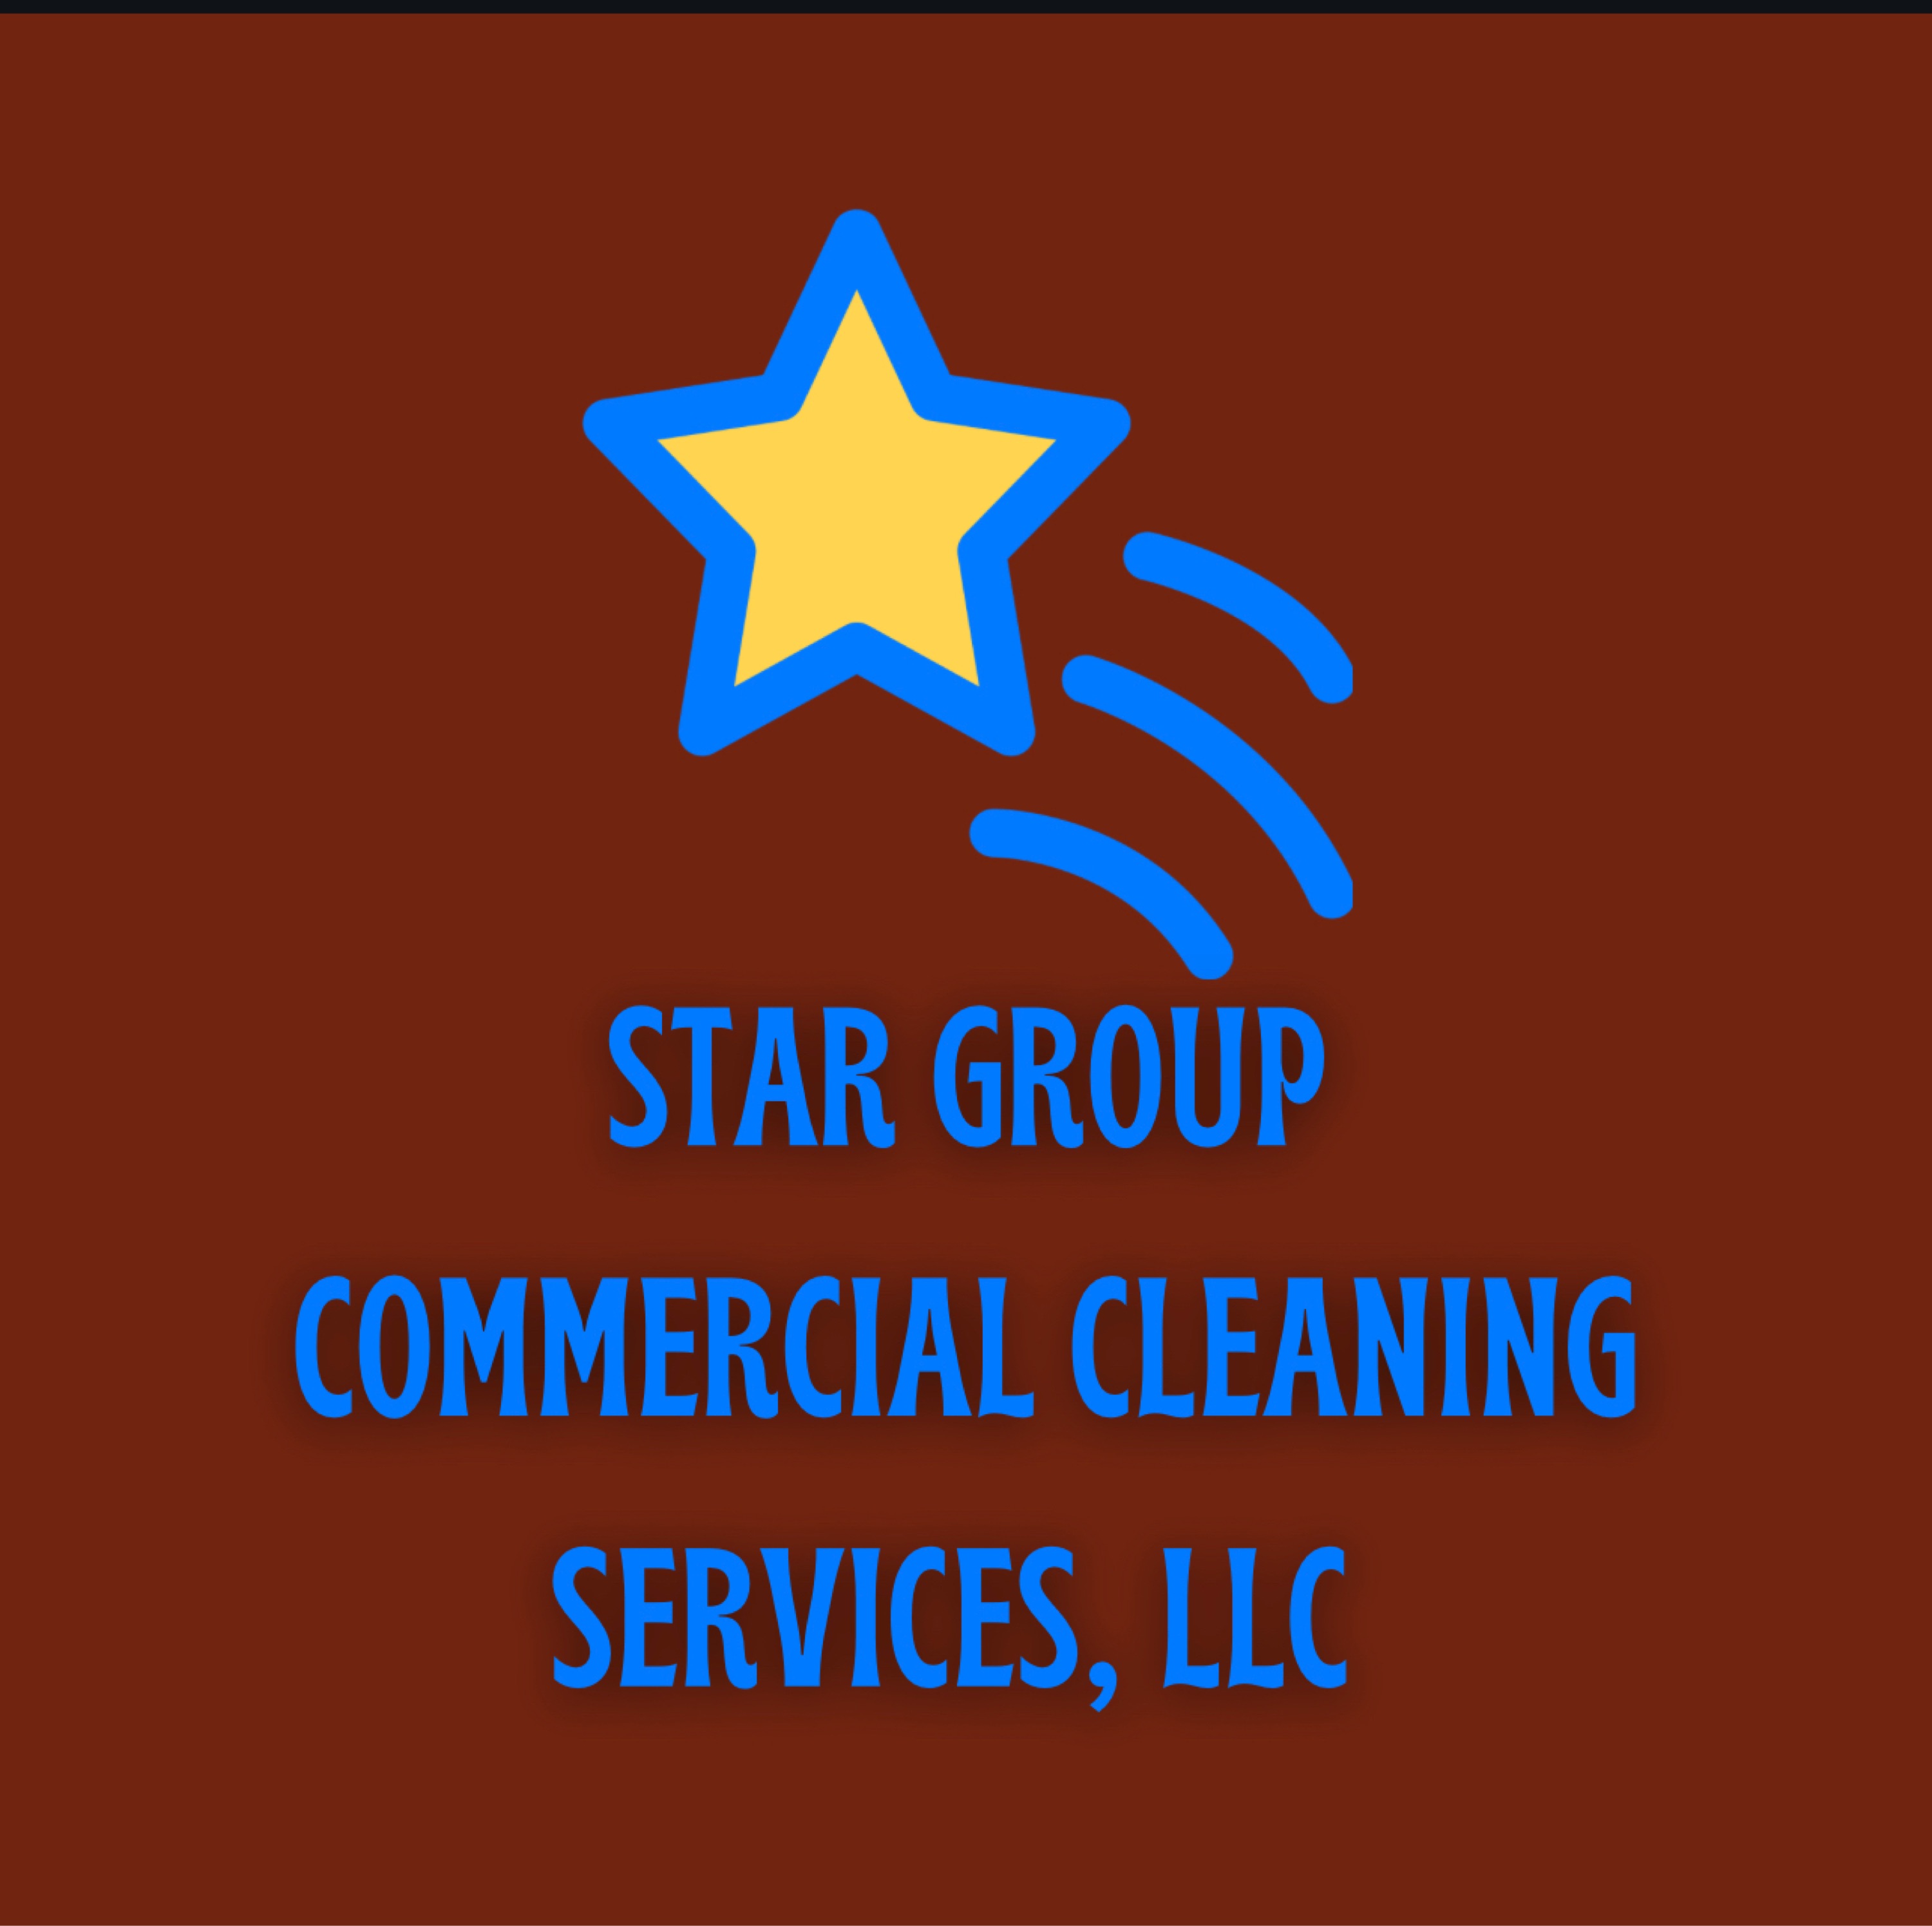 Star Group Commercial Cleaning Services, LLC Logo